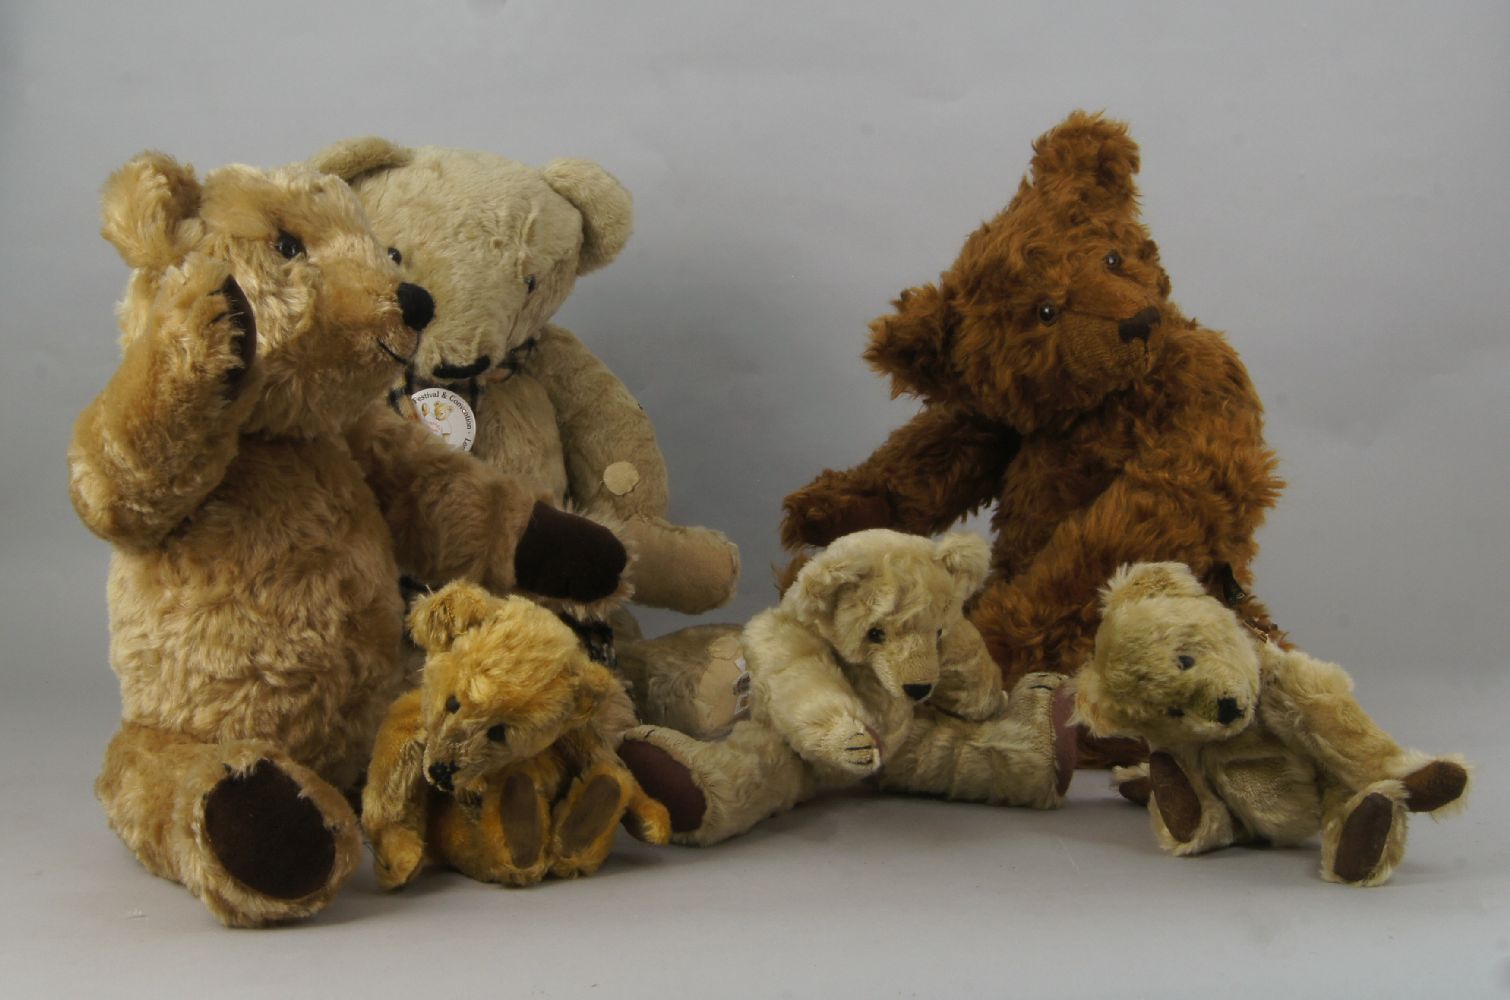 A teddy bear by Howell, applied with a label, Bears that are special, 53cm high, together with a